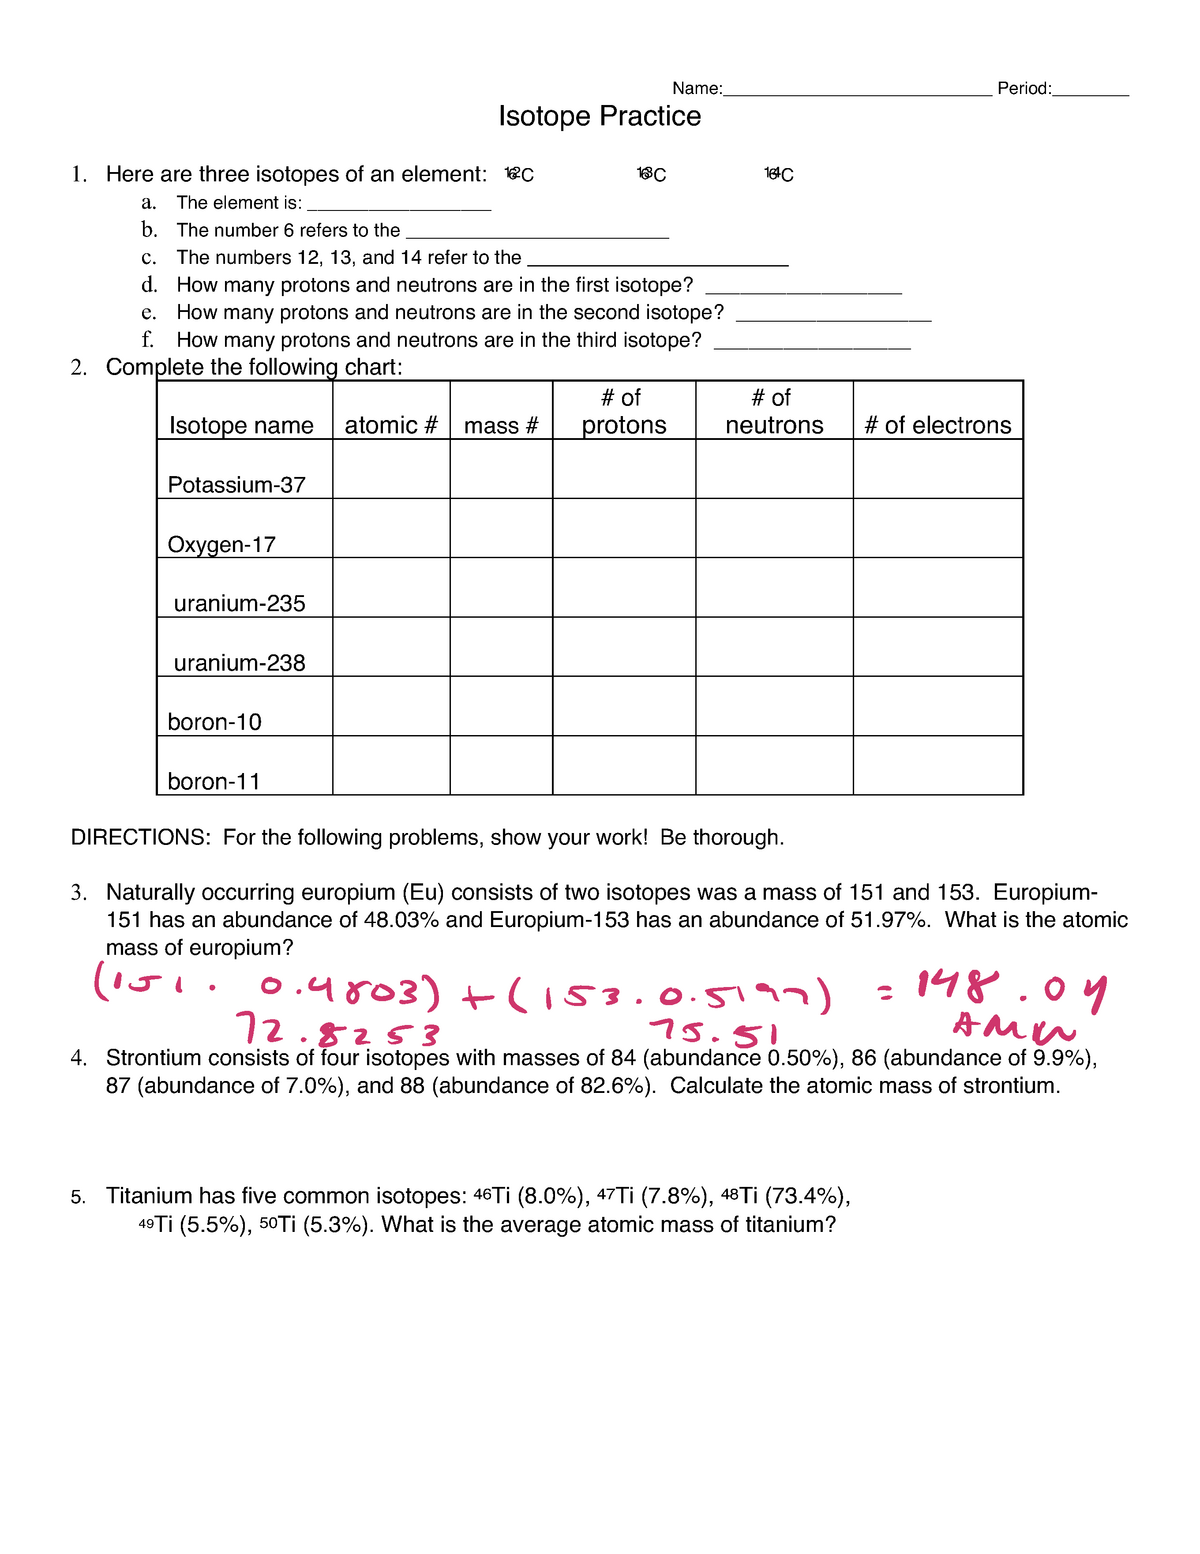 Isotope practice - eskandari summer - CHEM 21A - General In Isotope Practice Worksheet Answers